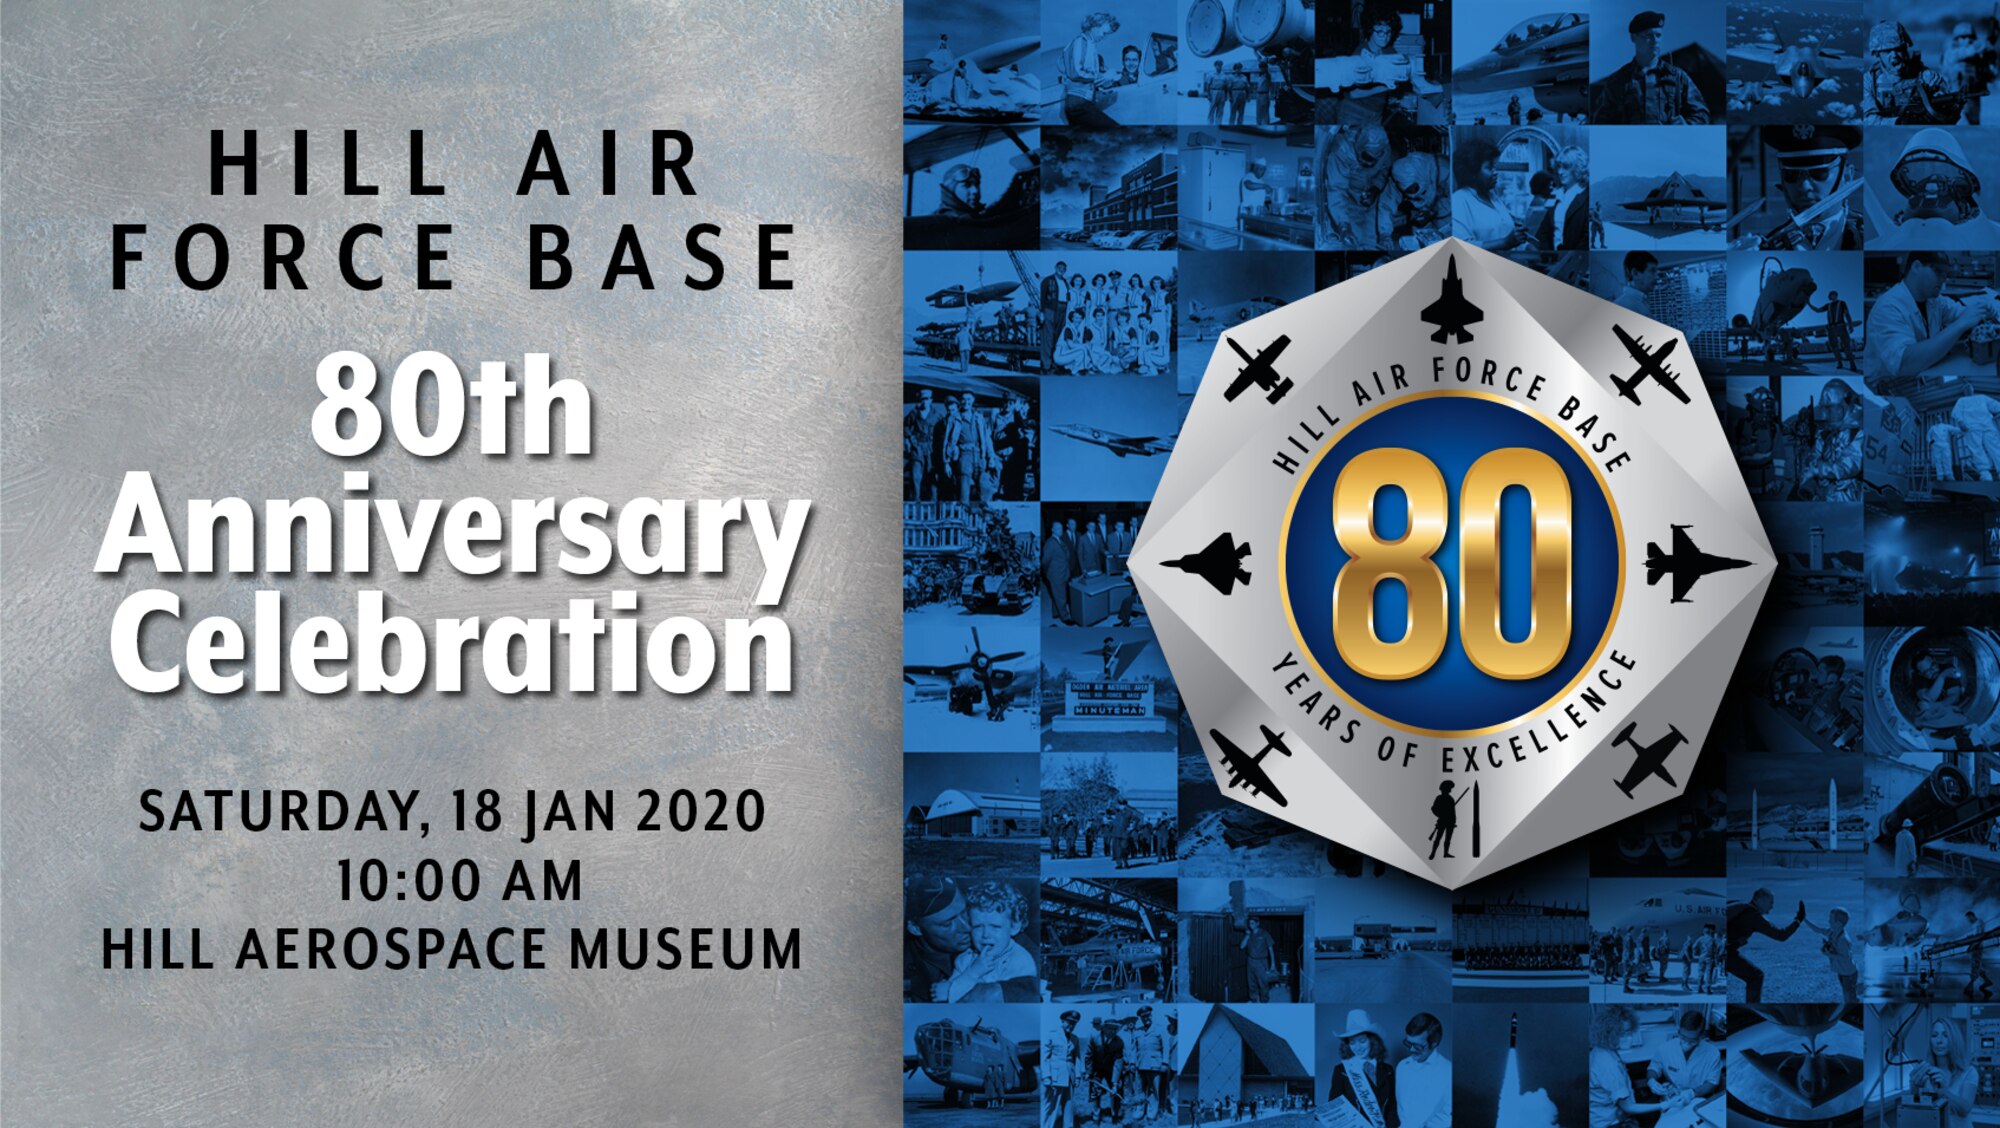 The left side of a graphic depicts the 80th Anniversary Celebration at Hill Air Force Base Saturday, January 18, 2020, at 10 a.m. at the Hill Aerospace Museum. The right side of the graphic is an eight-sided logo with gold a 80 in the center that placed over the top of a blue background.